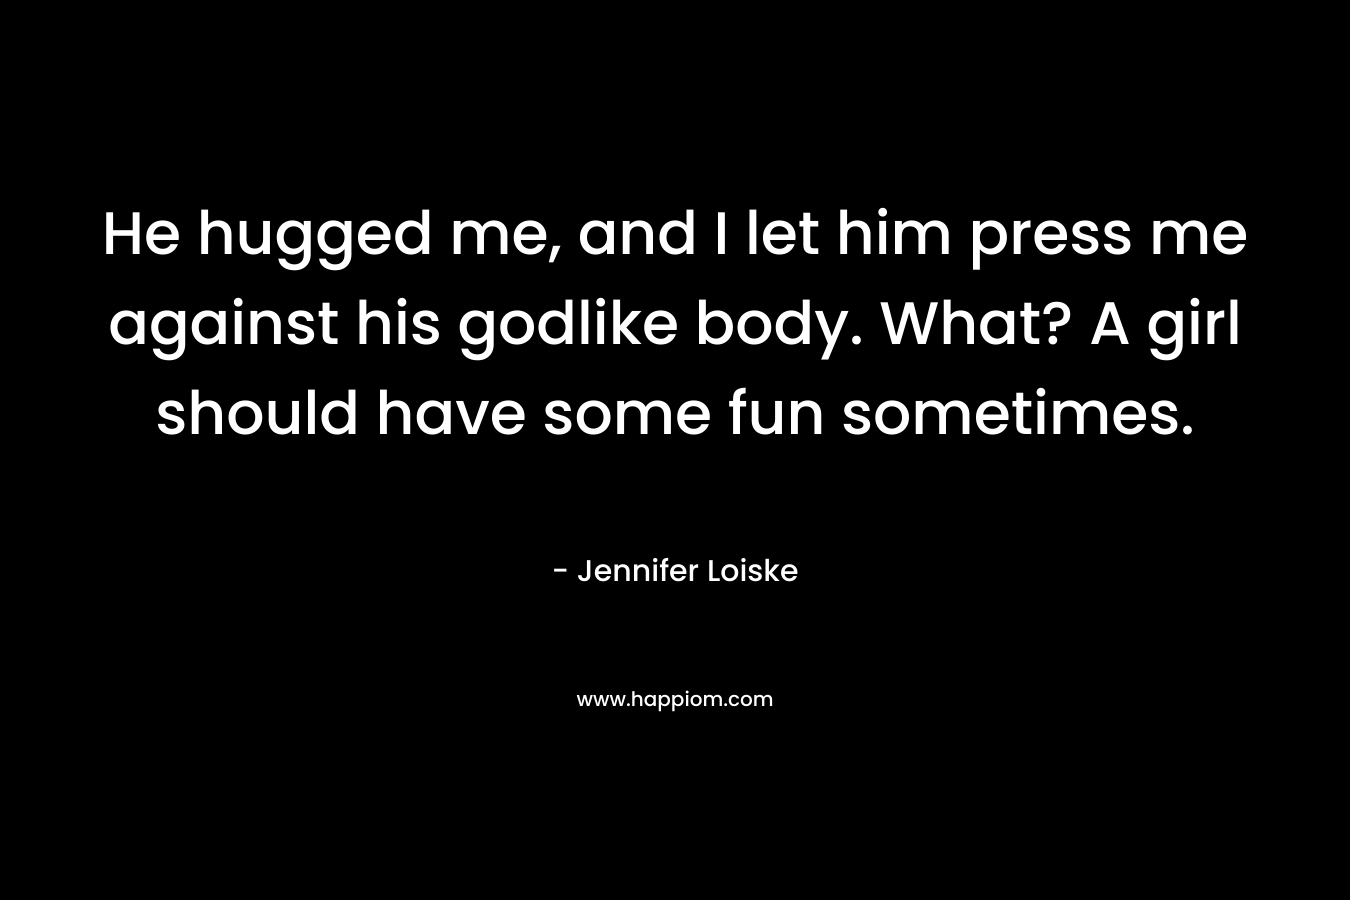 He hugged me, and I let him press me against his godlike body. What? A girl should have some fun sometimes. – Jennifer Loiske